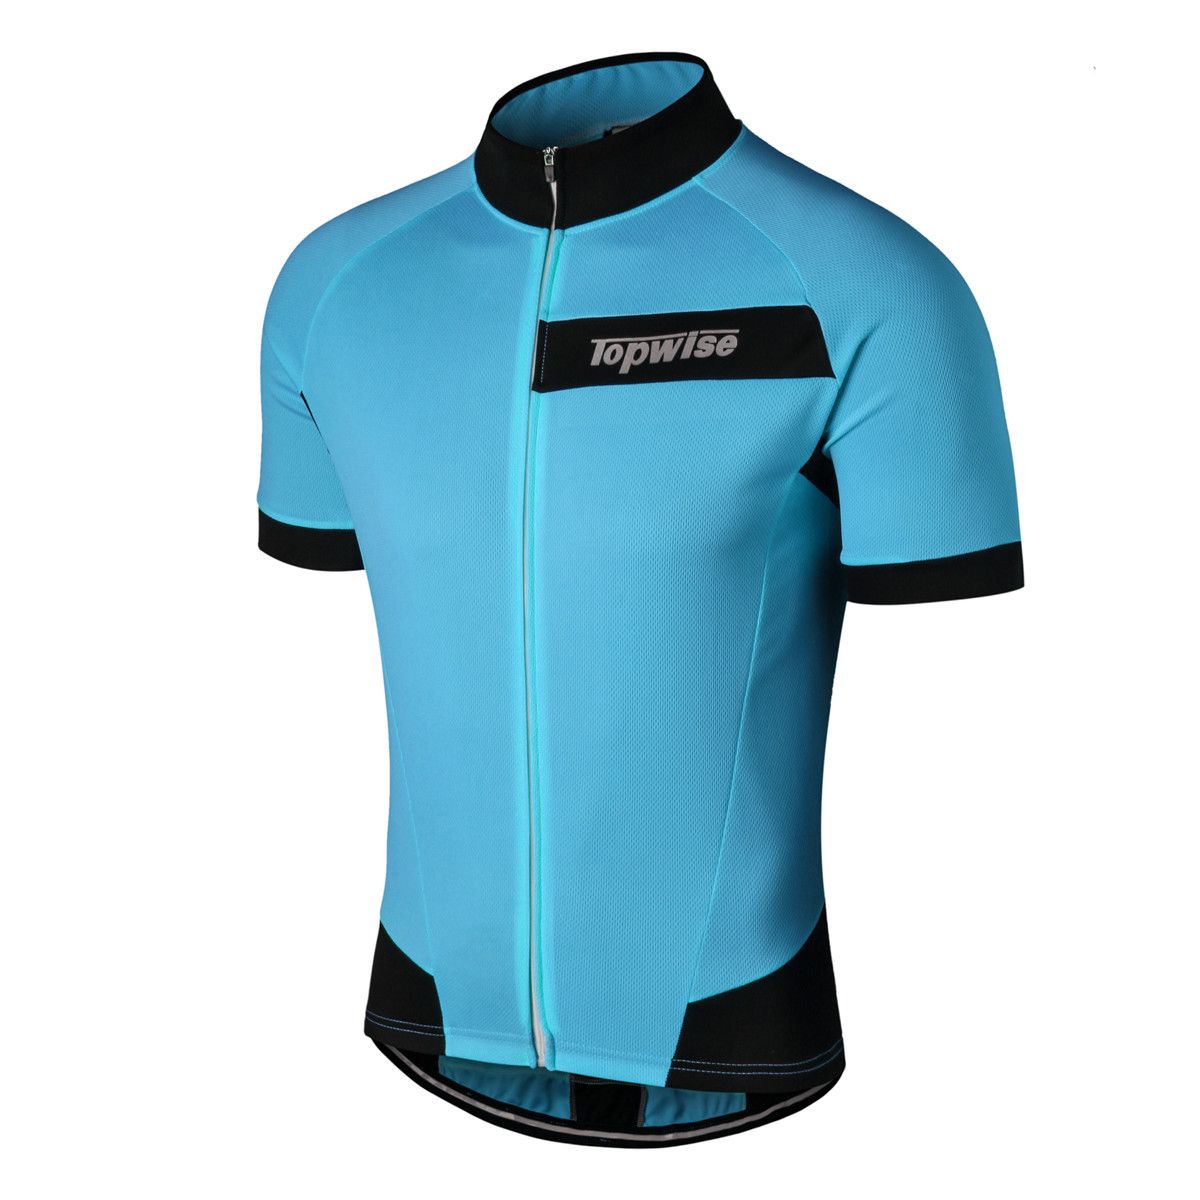 Cycling Shirts And Tops 2016 Cycling Jerseys Short Sleeves pertaining to cycling shirts with regard to Invigorate